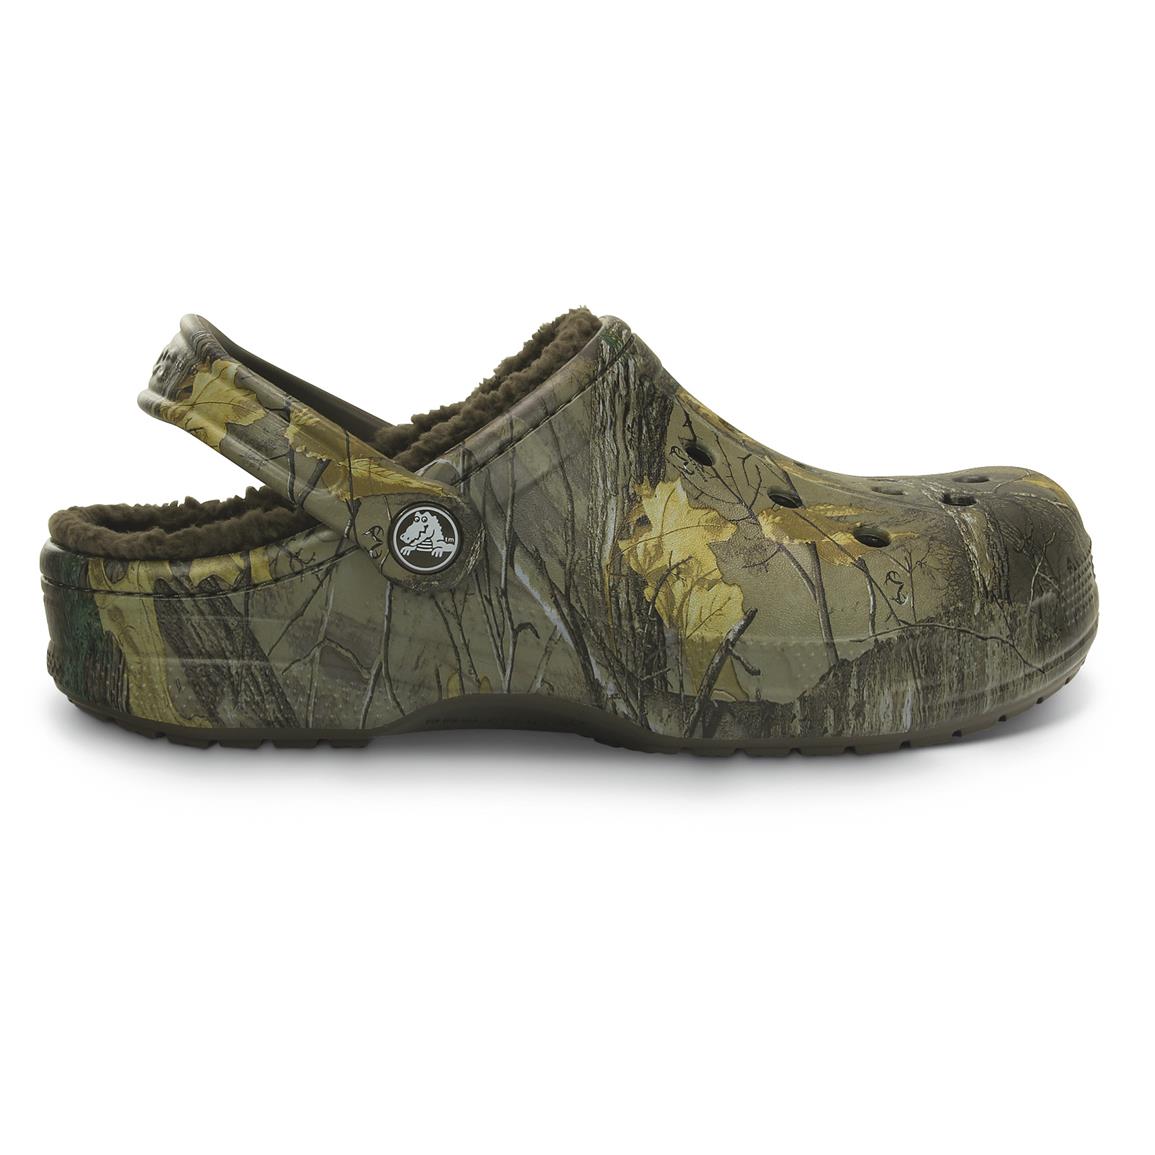 Crocs Unisex Realtree Xtra Camo Winter Clogs - 665561, Casual Shoes at ...